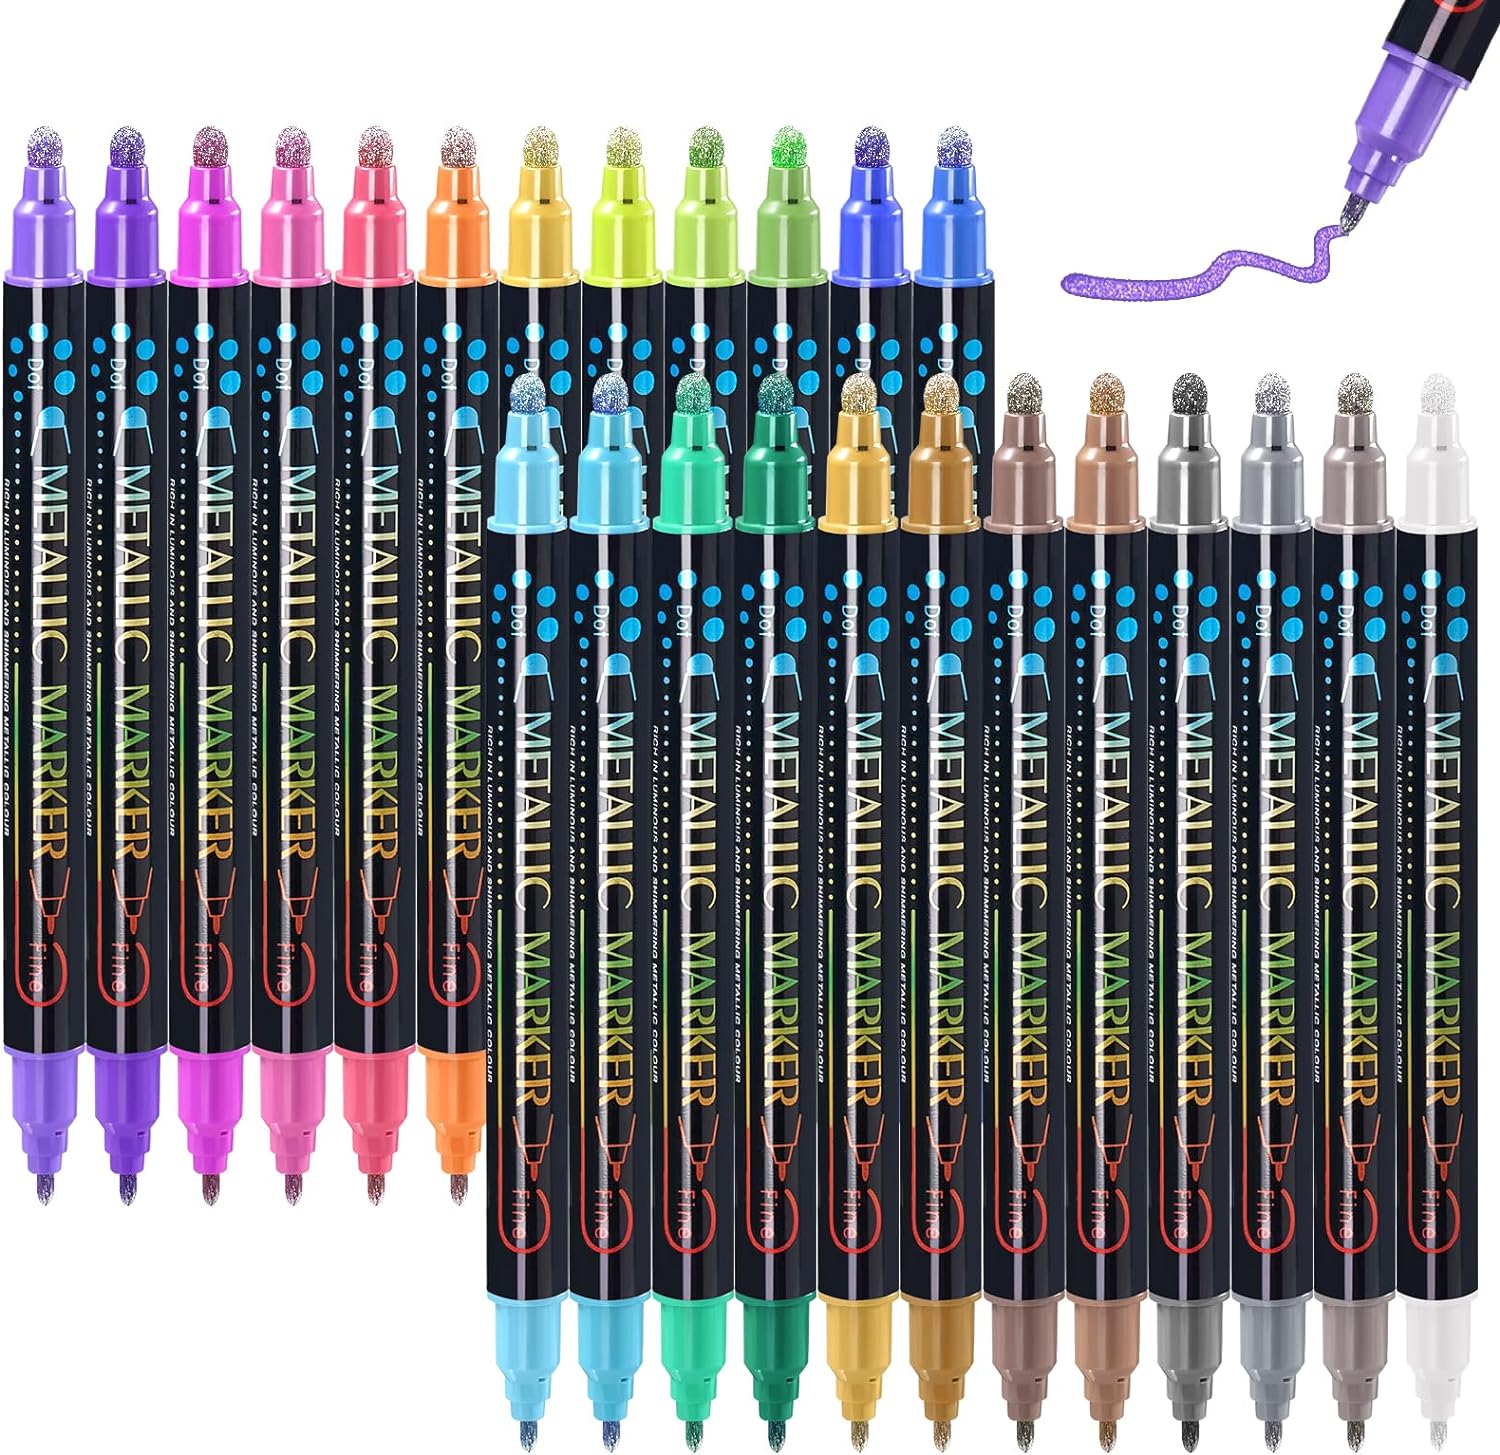 Guangna 36 Colors Metallic Paint Twin Marker Pens with Dot and Fine Tip